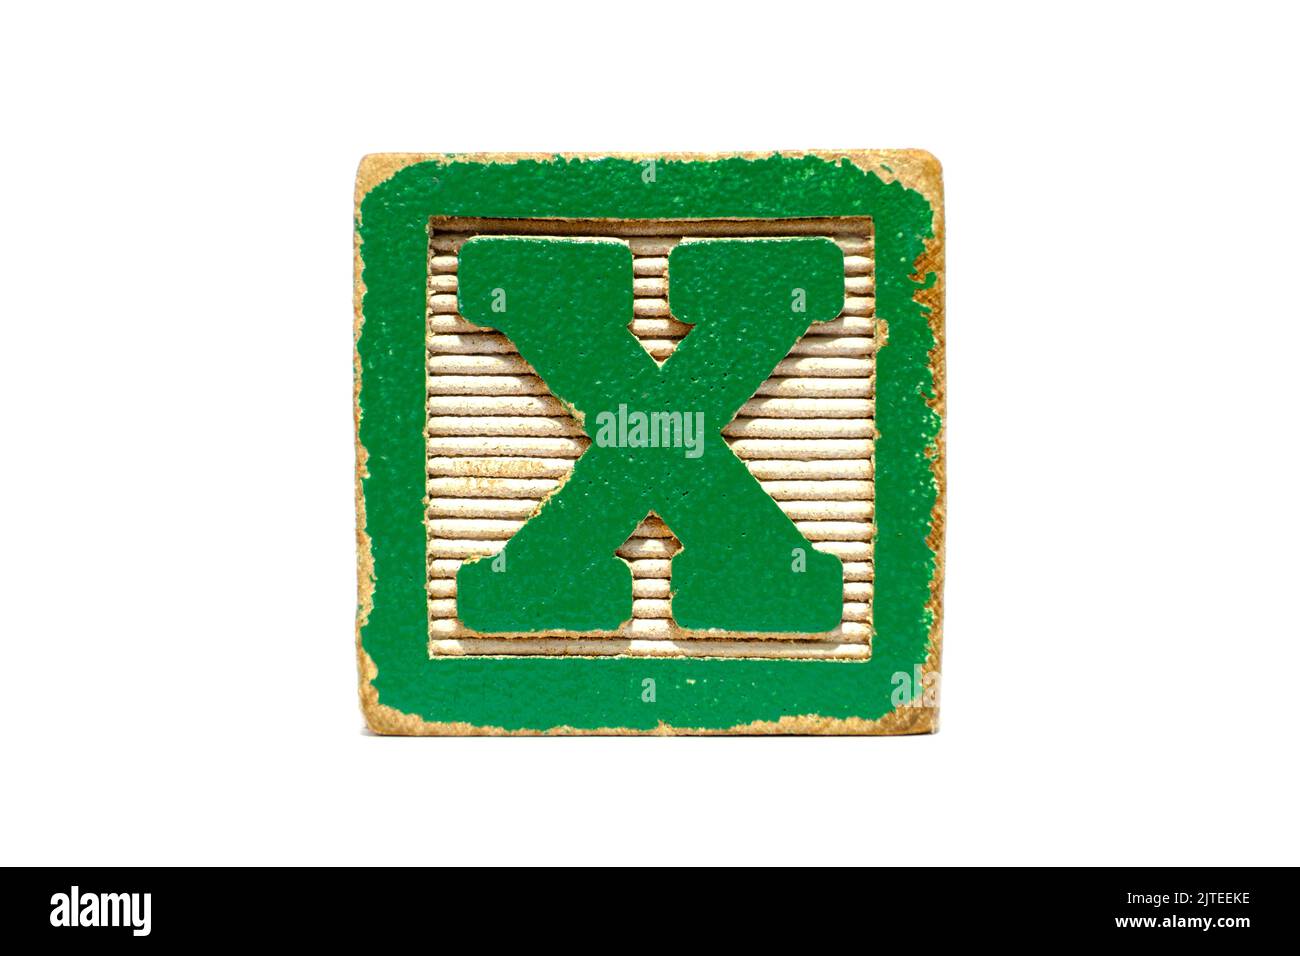 Distressed vintage green and white toy block, photographed against a white background. The letter X. Childhood education tool or toy Stock Photo